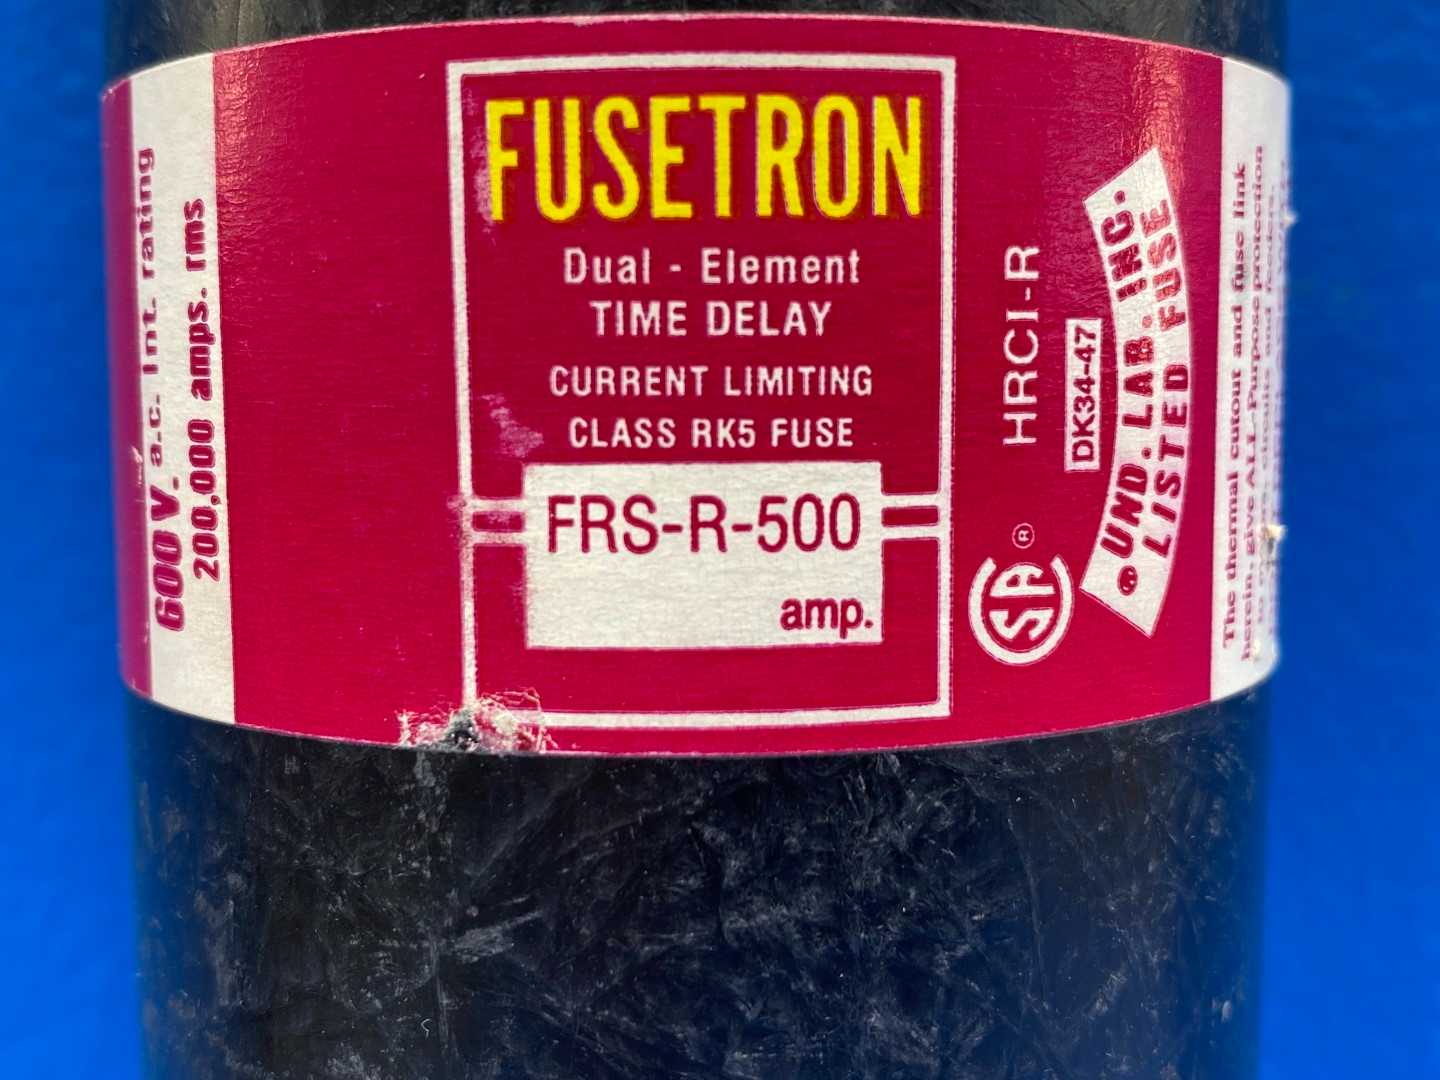 Fusetron FRS-R-500 Class RK5 Fuse 600V (HRCI-R)